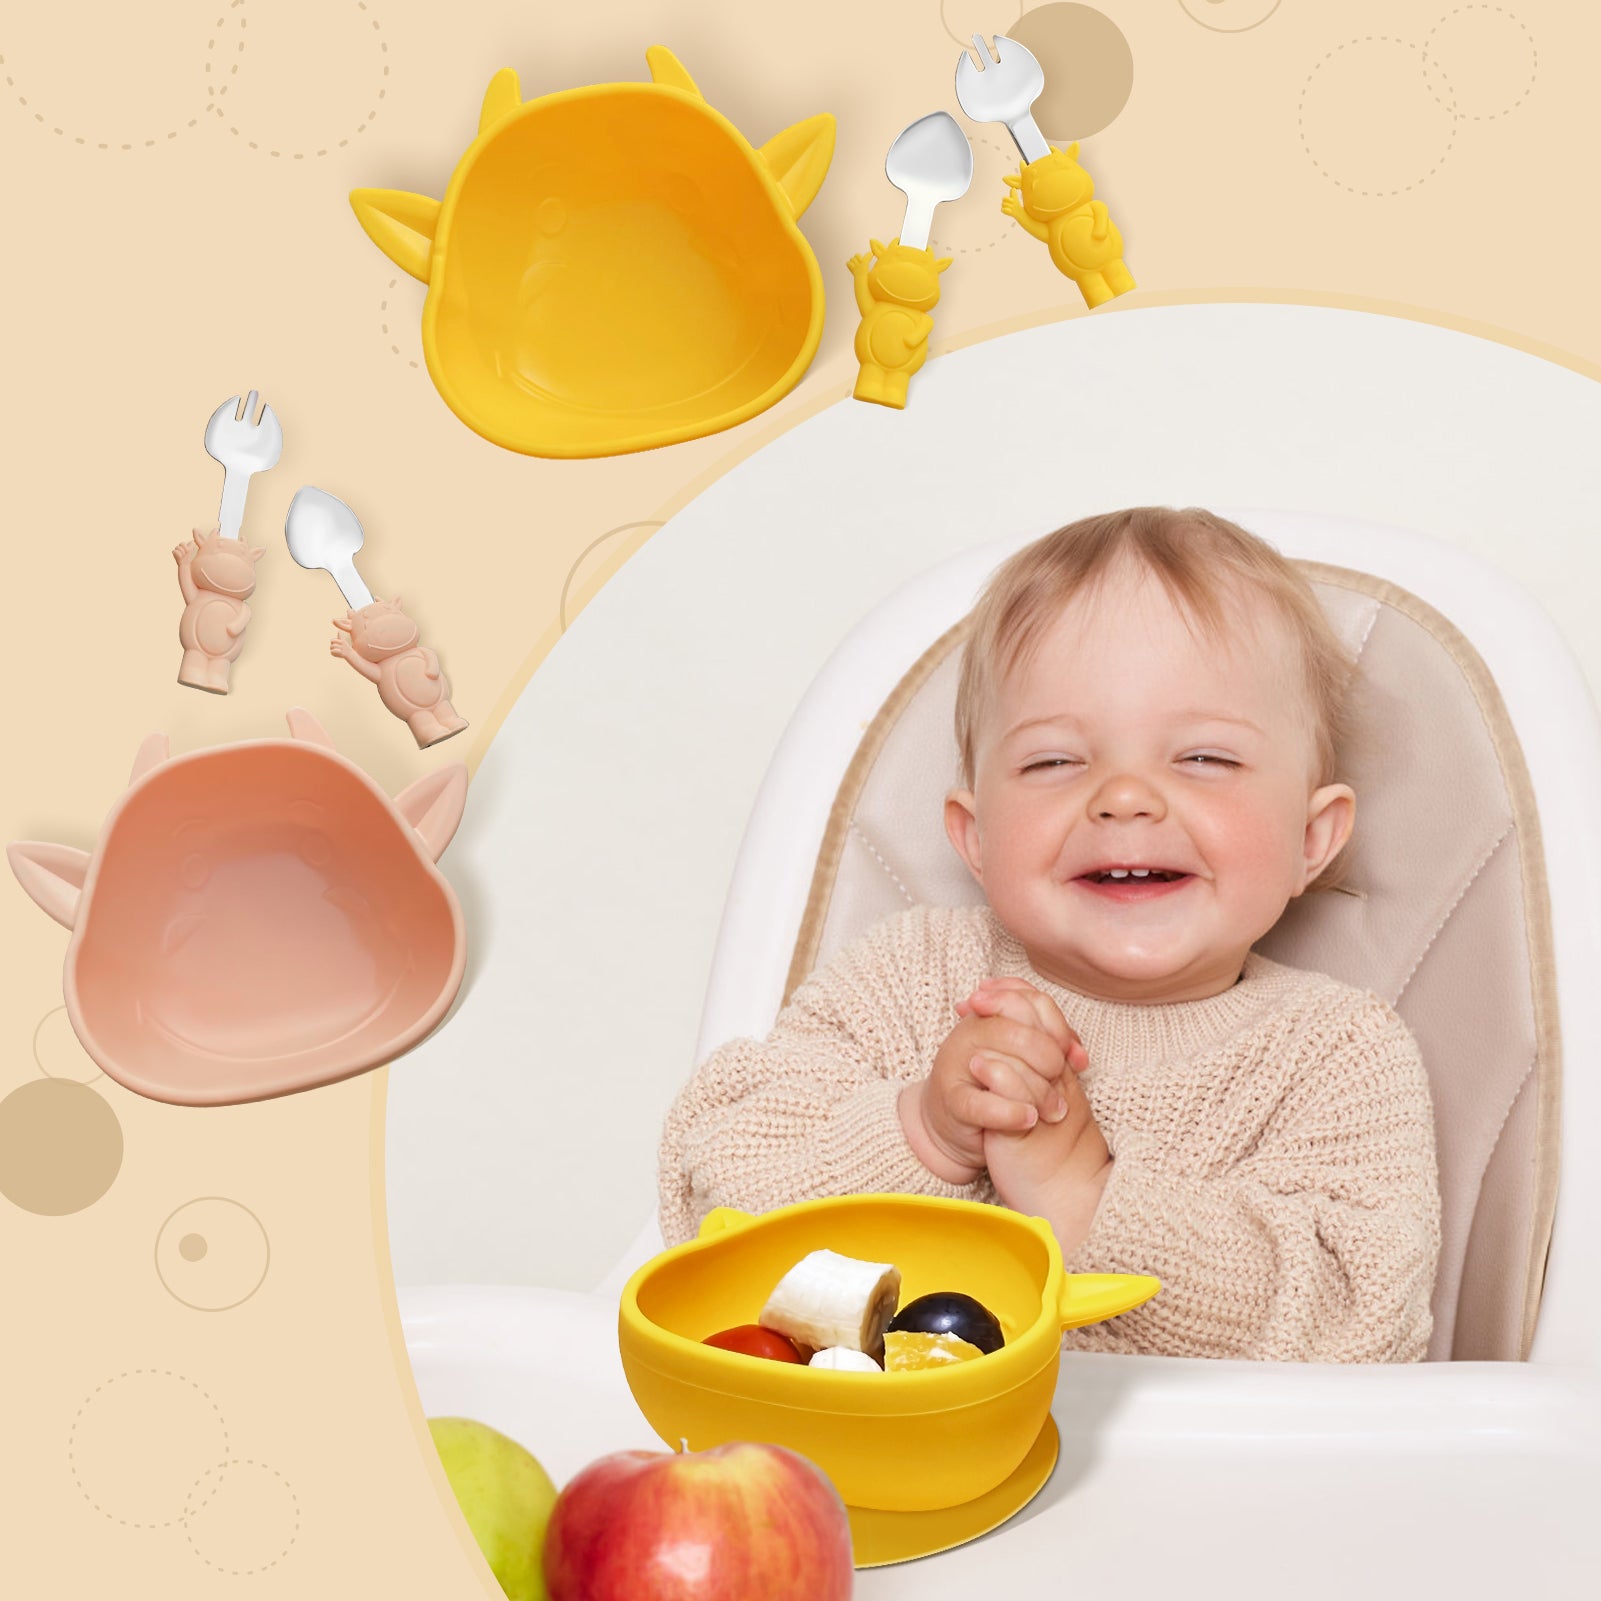 Baby Feeding Set | Baby Led Weaning Utensils Set Includes Suction Bowl and  Plate, Sippy Cup with Straw and Lid | Baby Feeding Supplies Set COW BOWL